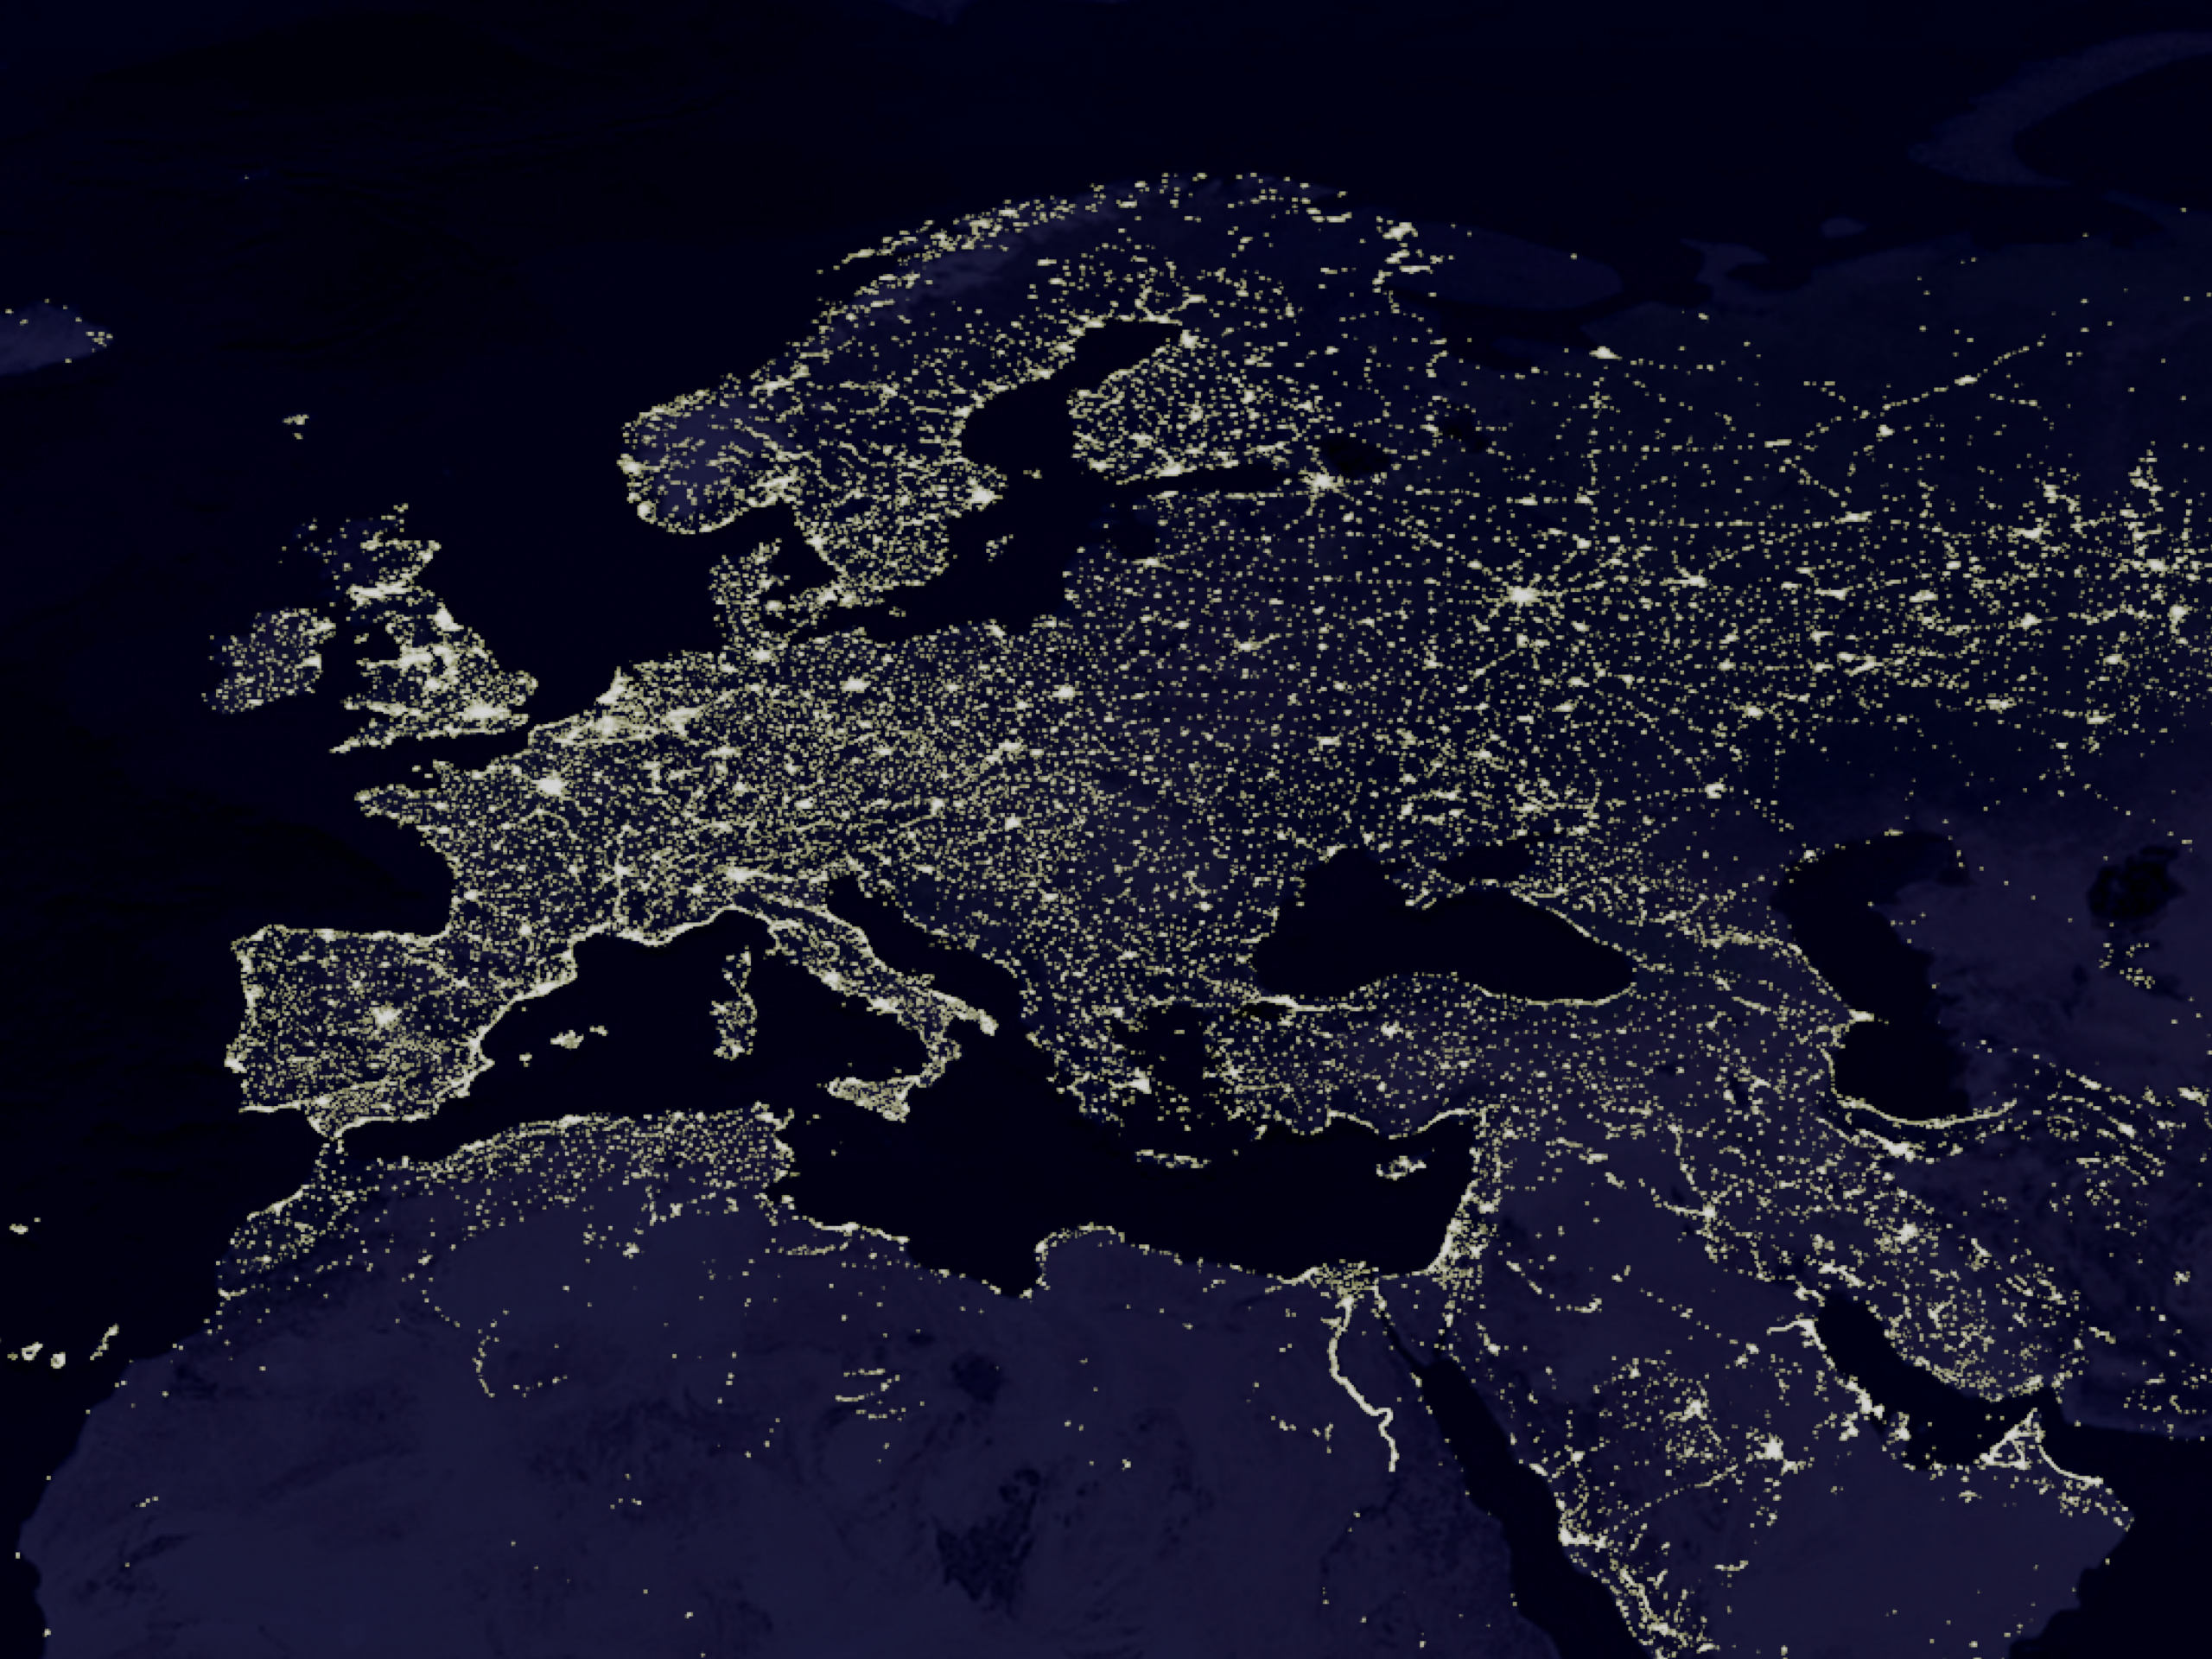 The Night Lights of Europe (as seen from space) HD Wallpaper